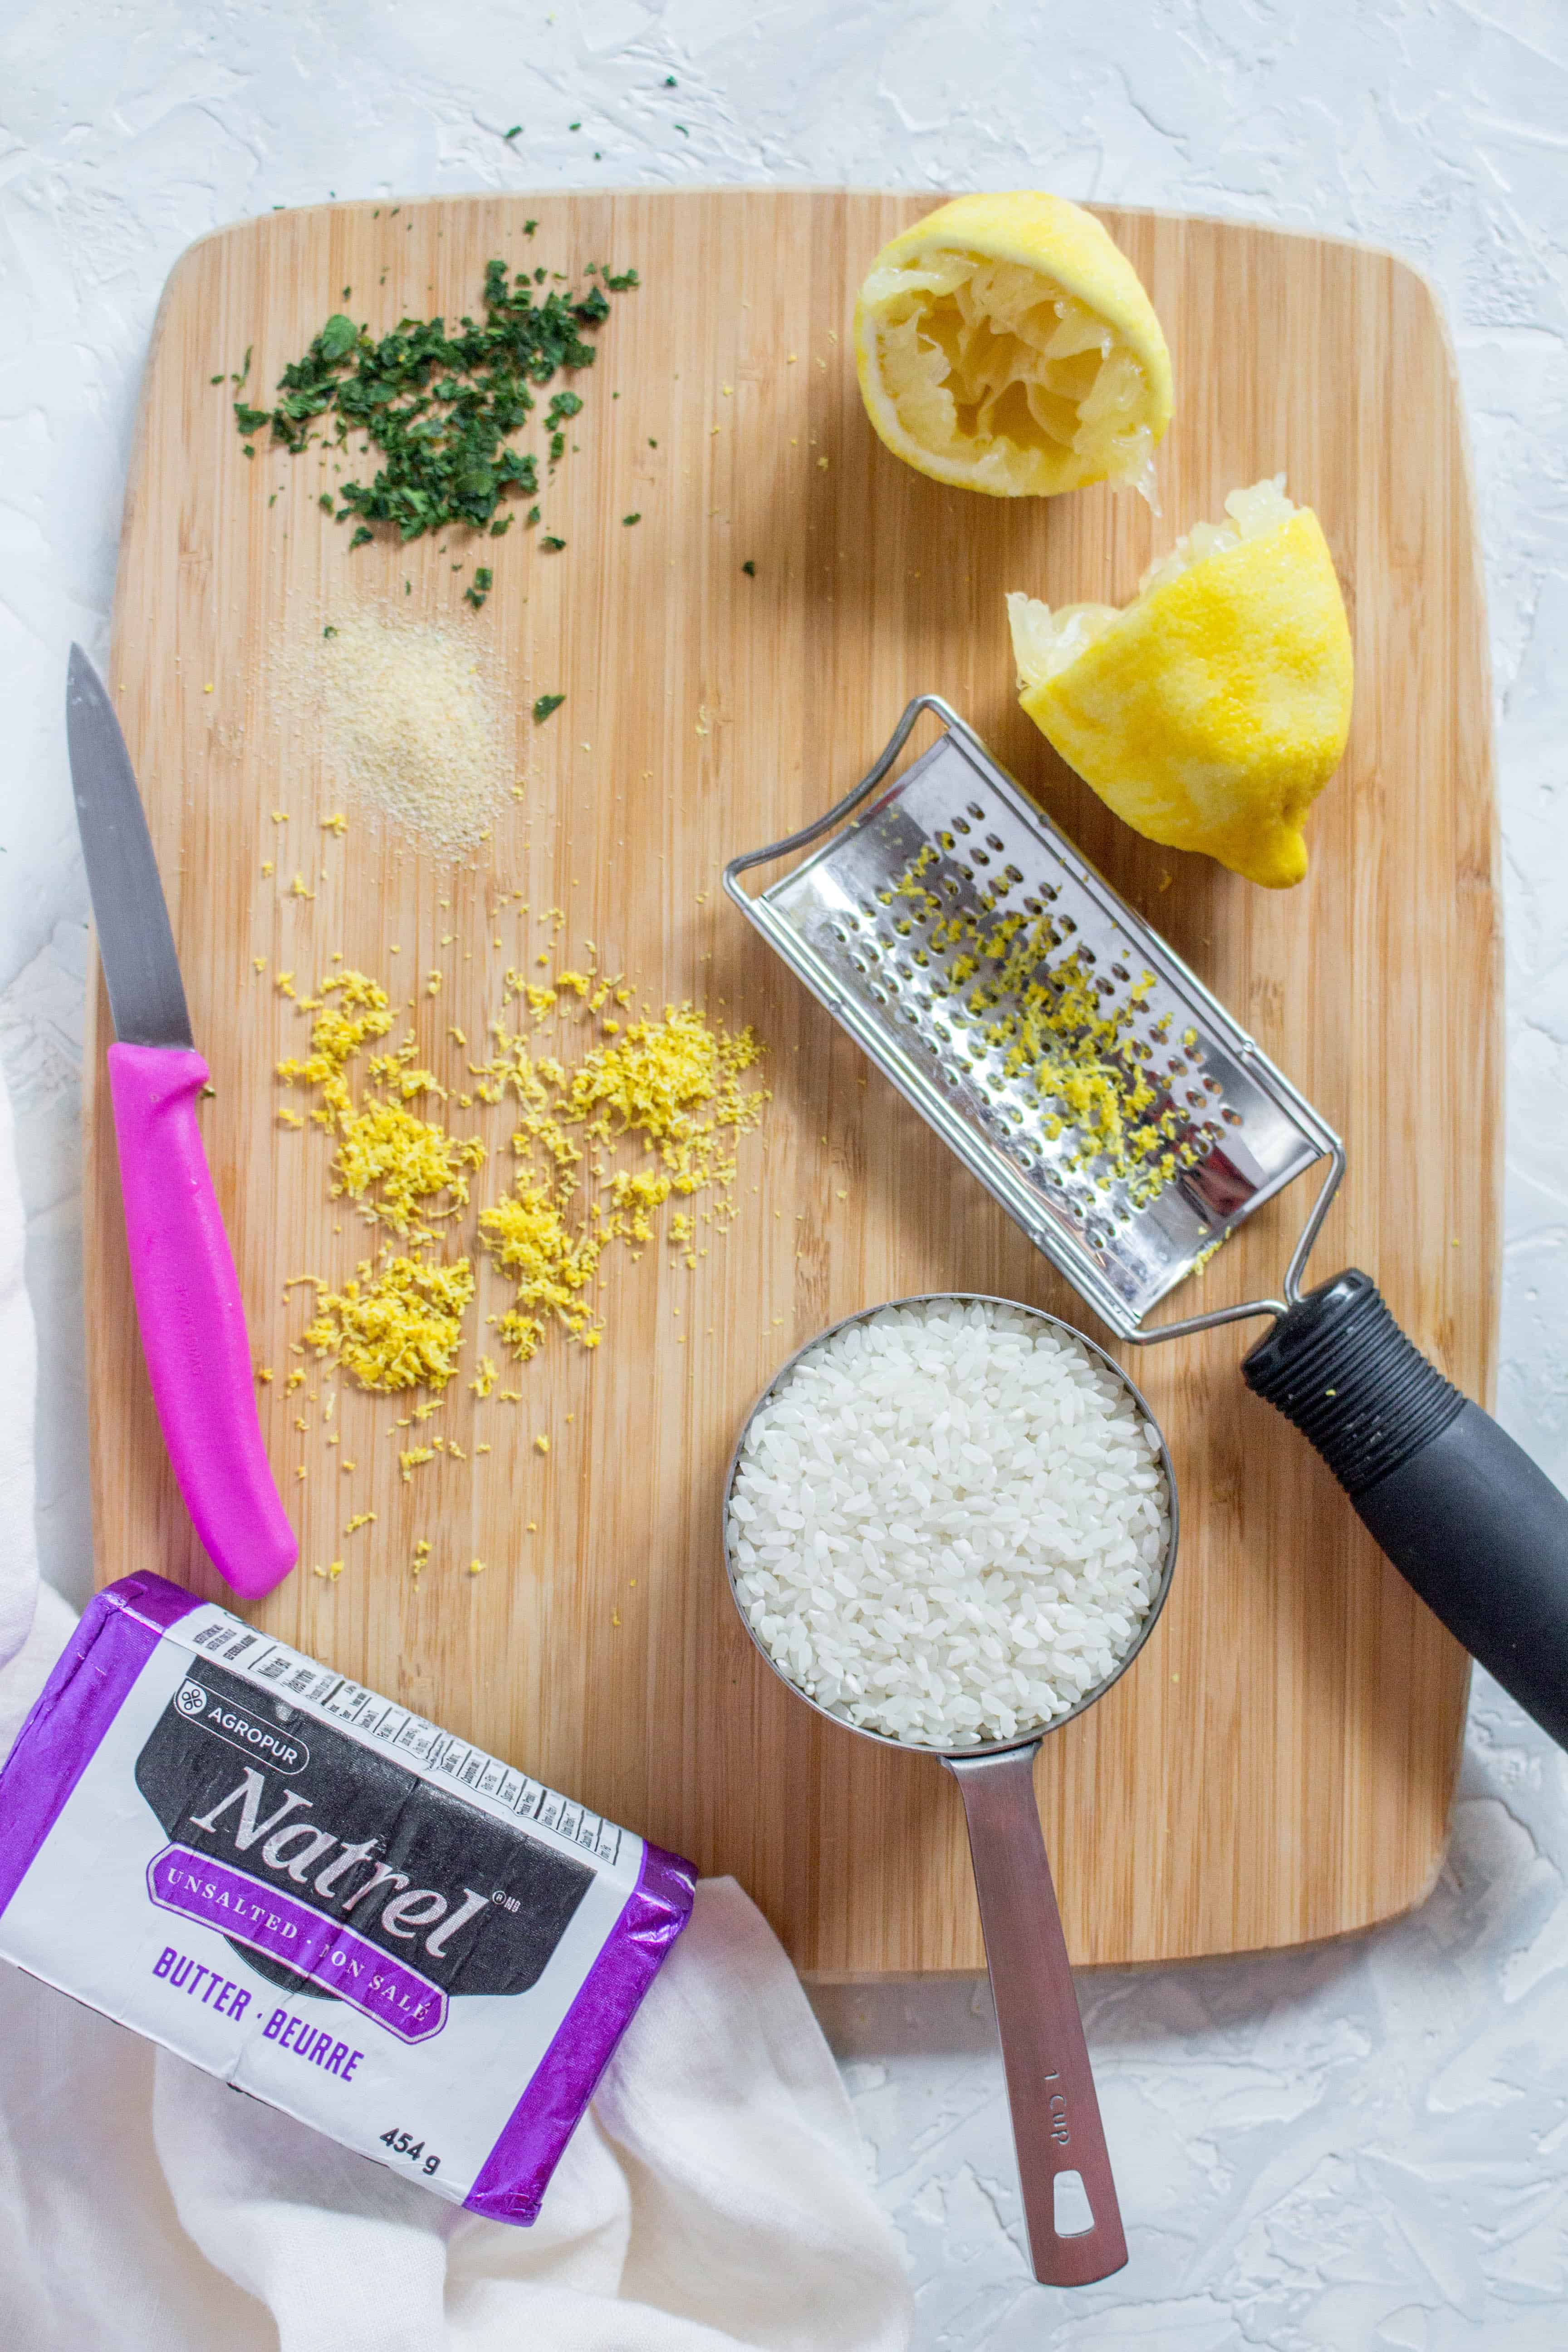 Looking for a fun way to step up your regular plain rice? Try this easy lemon garlic rice a try! Great for going alongside your dinner or in a meal prep.